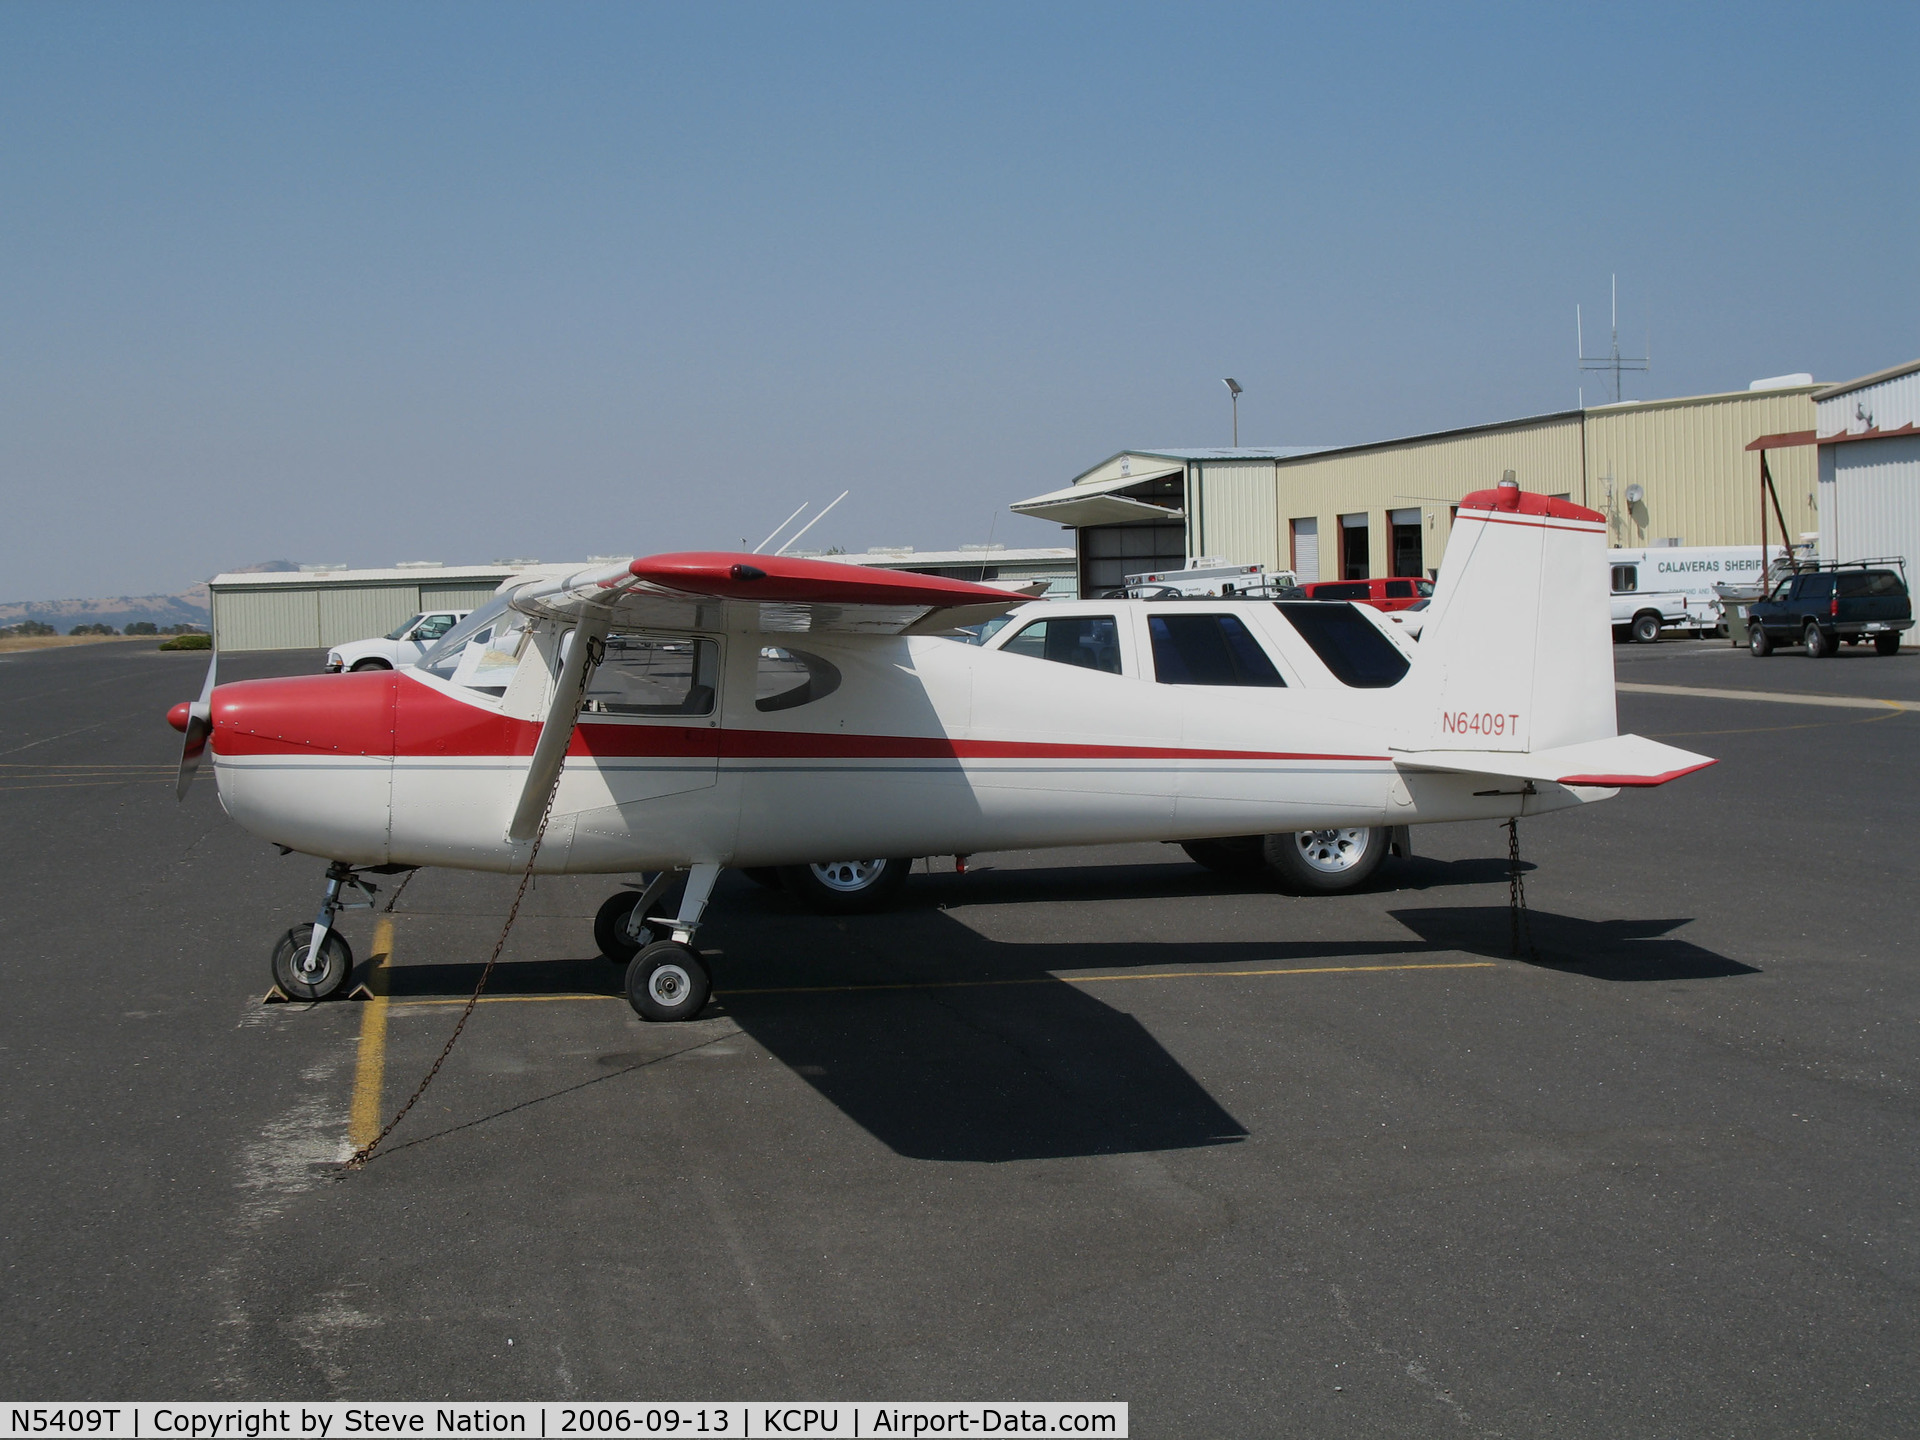 N5409T, 1964 Cessna 172E C/N 17251309, Locally-based 1964 Cessna 172E Skyhawk @ Maury Rasmussen Field/Calaveras County Airport, San Andreas, CA (now registered to owner in Anchorage, AK)